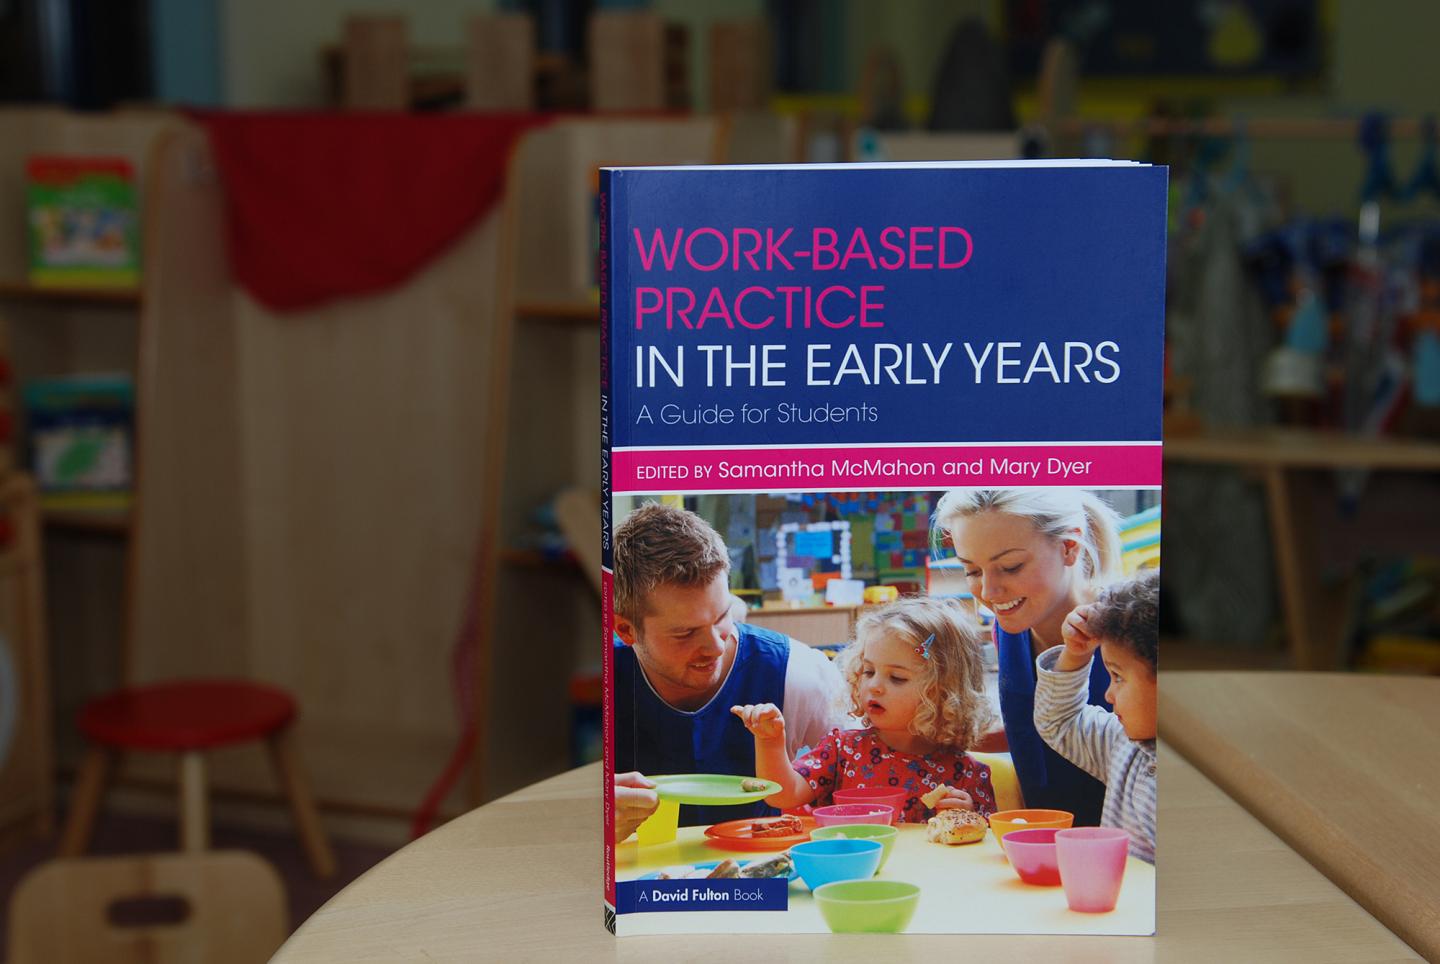 Work-based Practice in the Early Years - A Guide for Students,